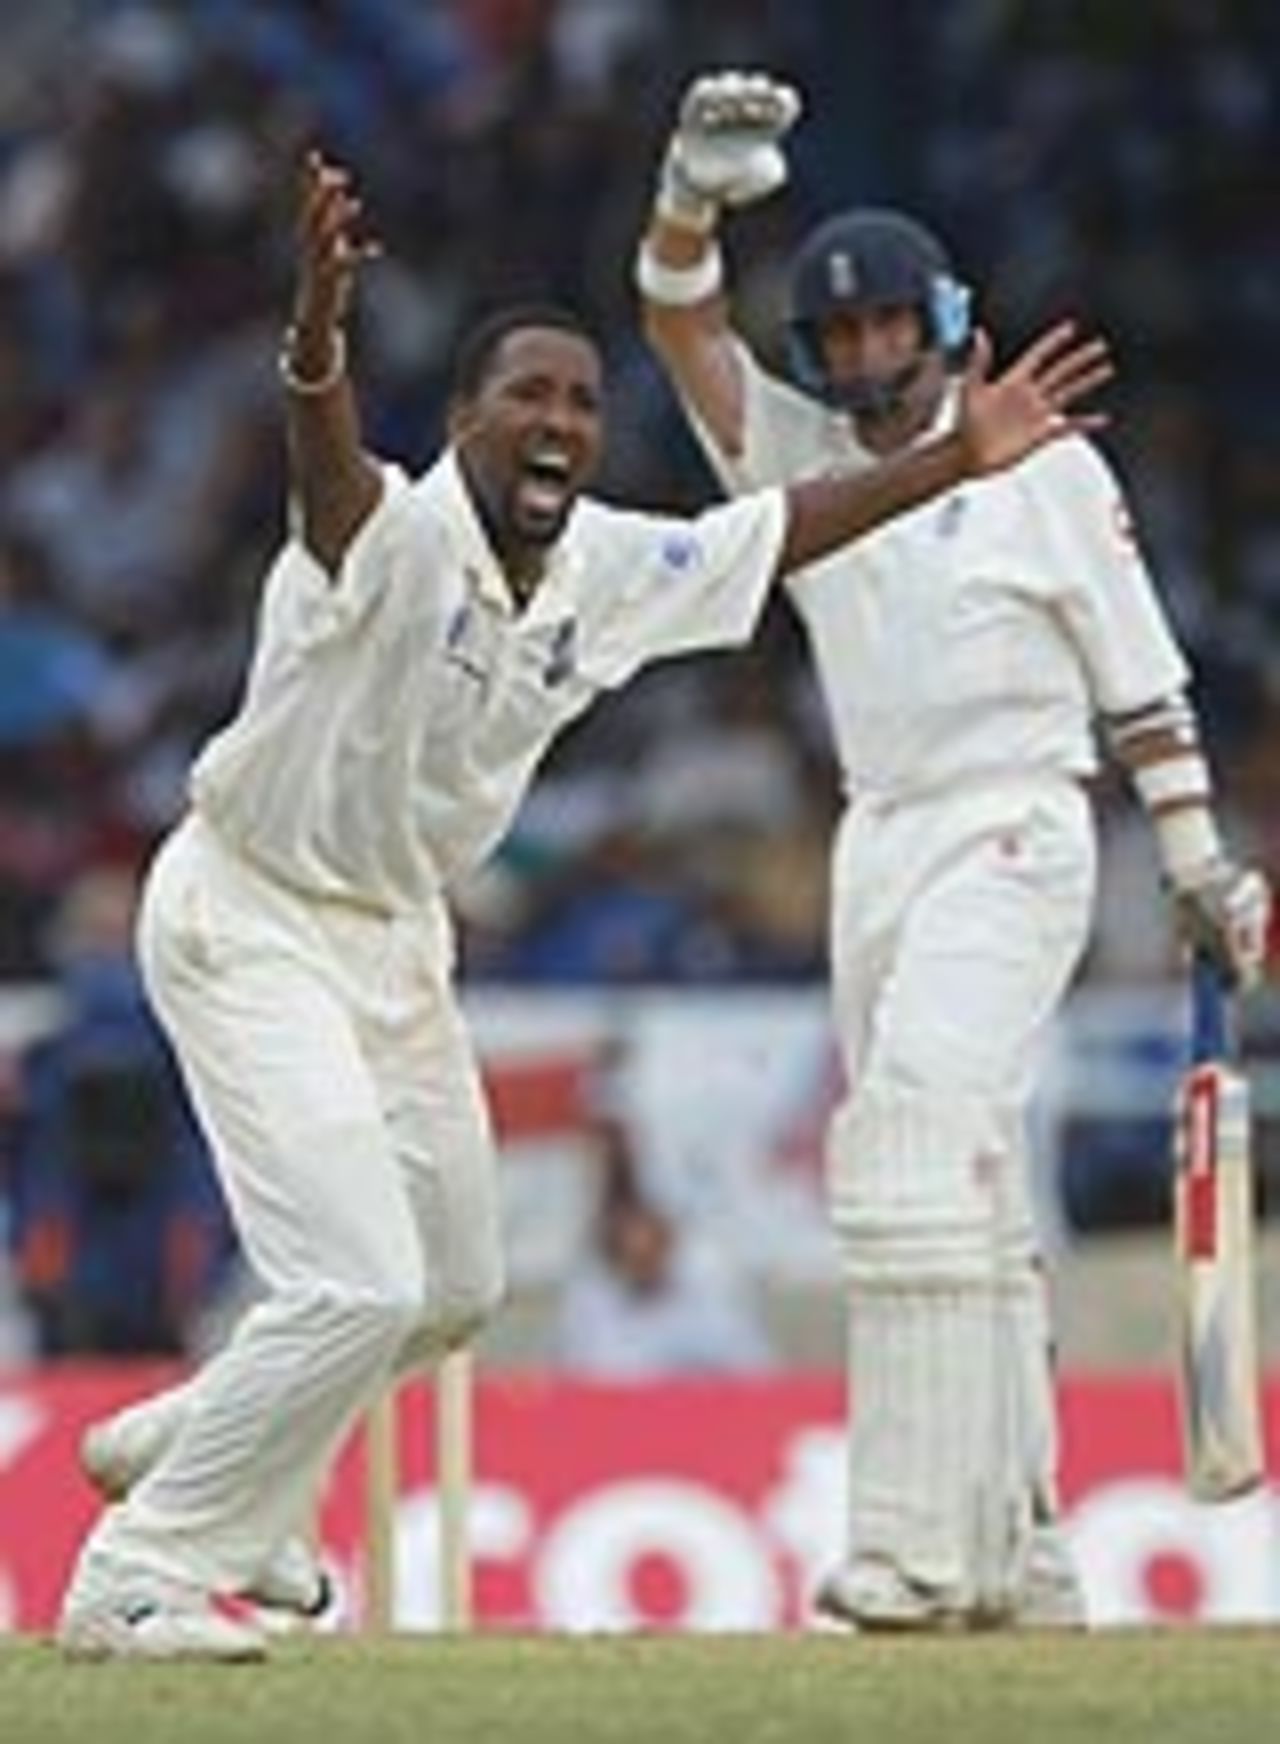 Corey Collymore appeals for the wicket of Nasser Hussain, West Indies v England, 2nd Test, Trinidad, 2nd day, March 20, 2004